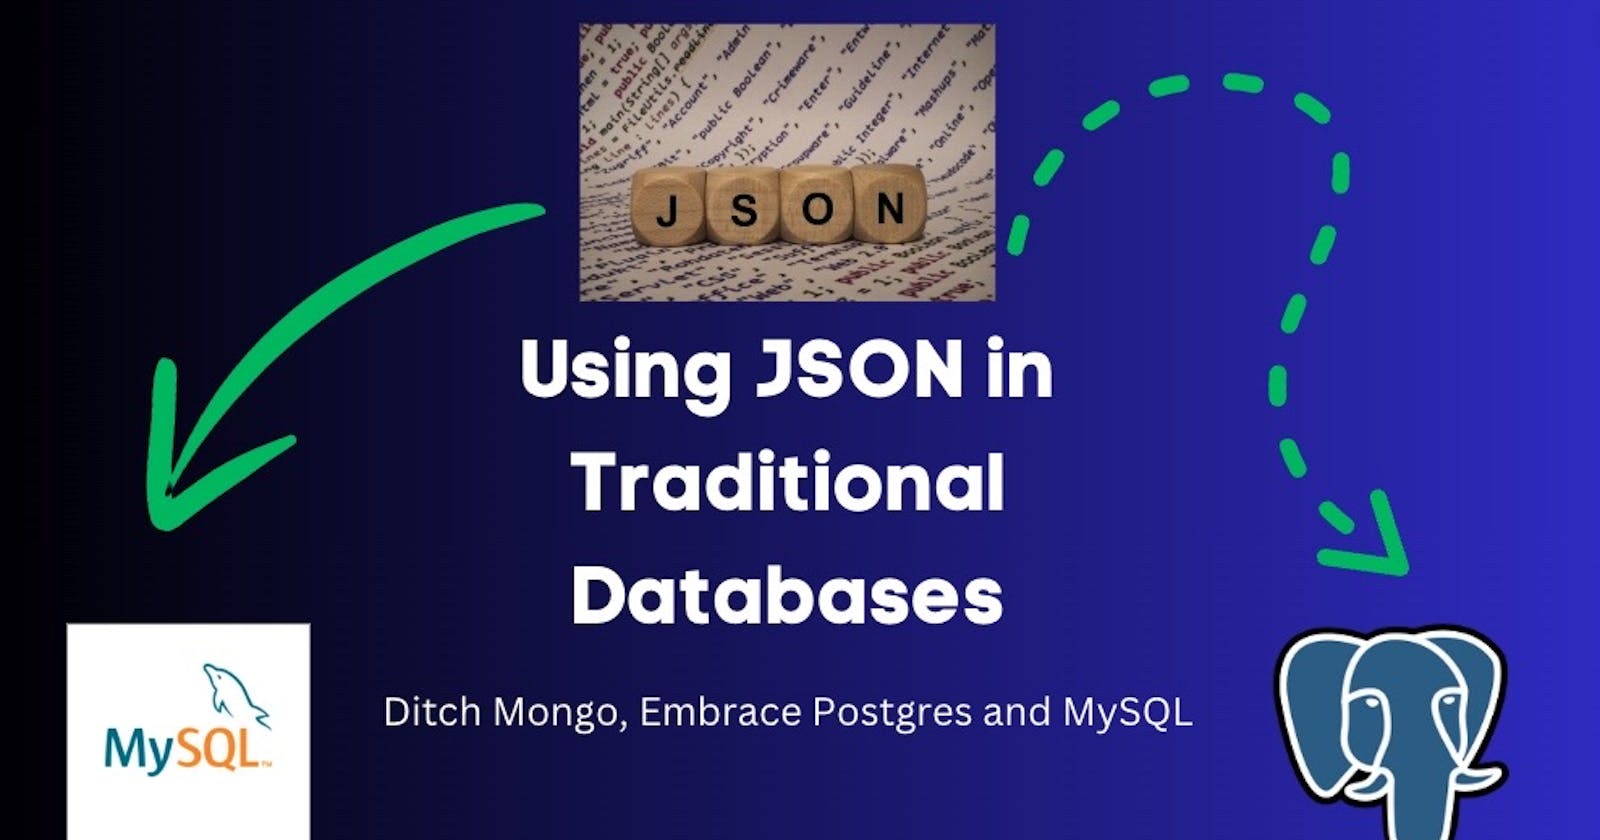 JSON in Traditional Databases